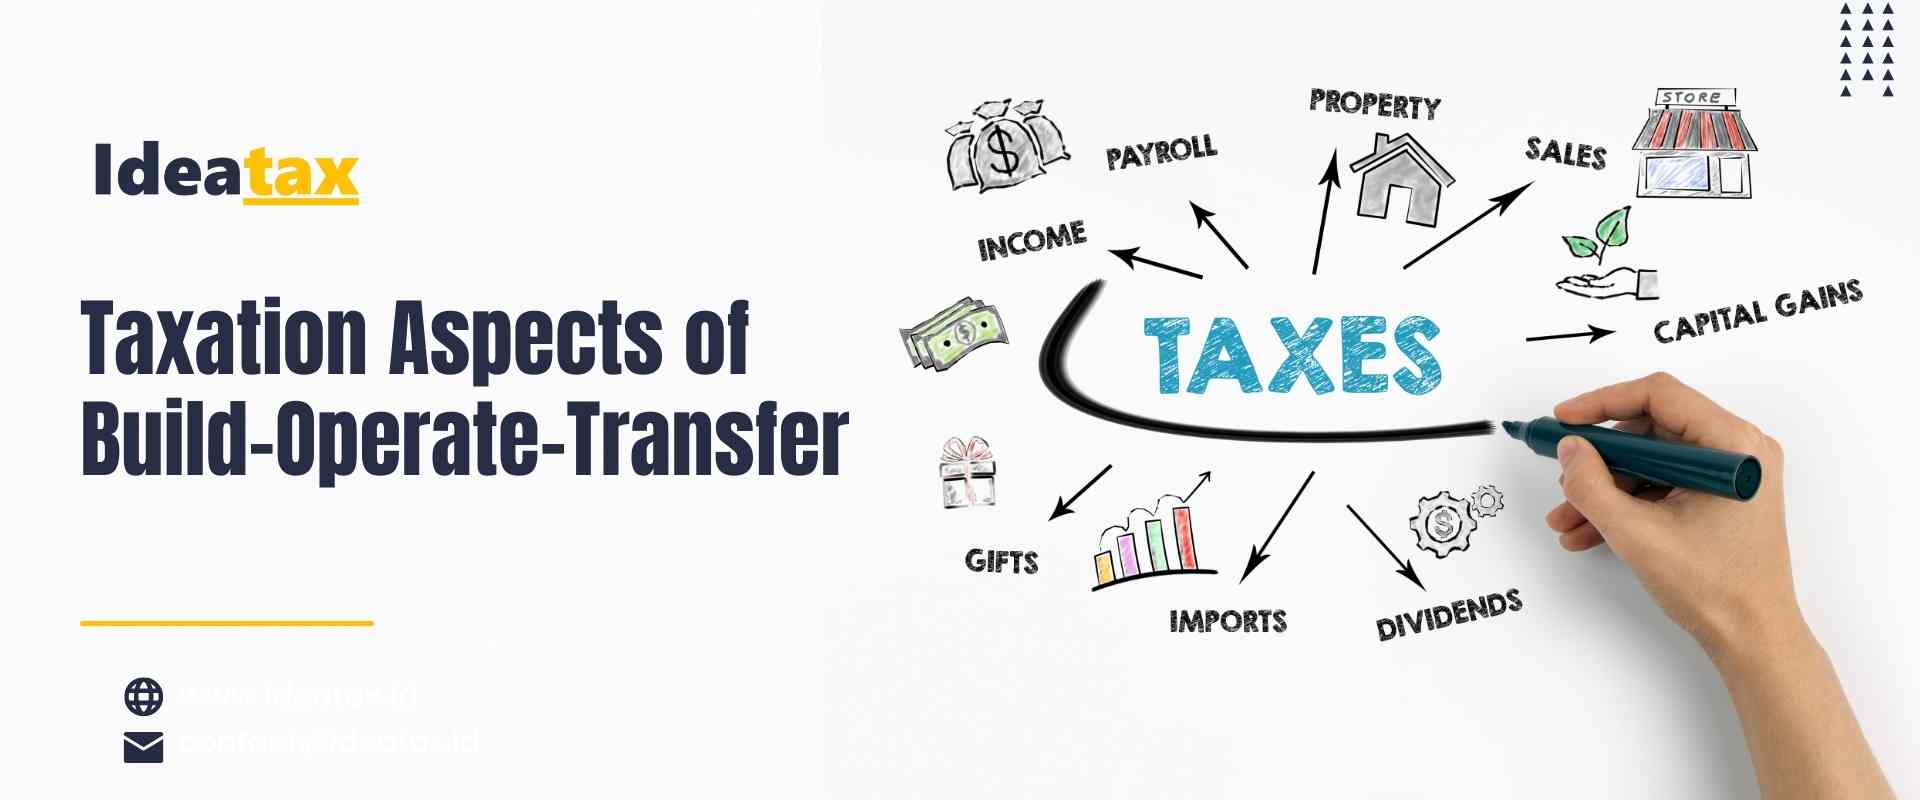 Taxation Aspects of Build-Operate-Transfer